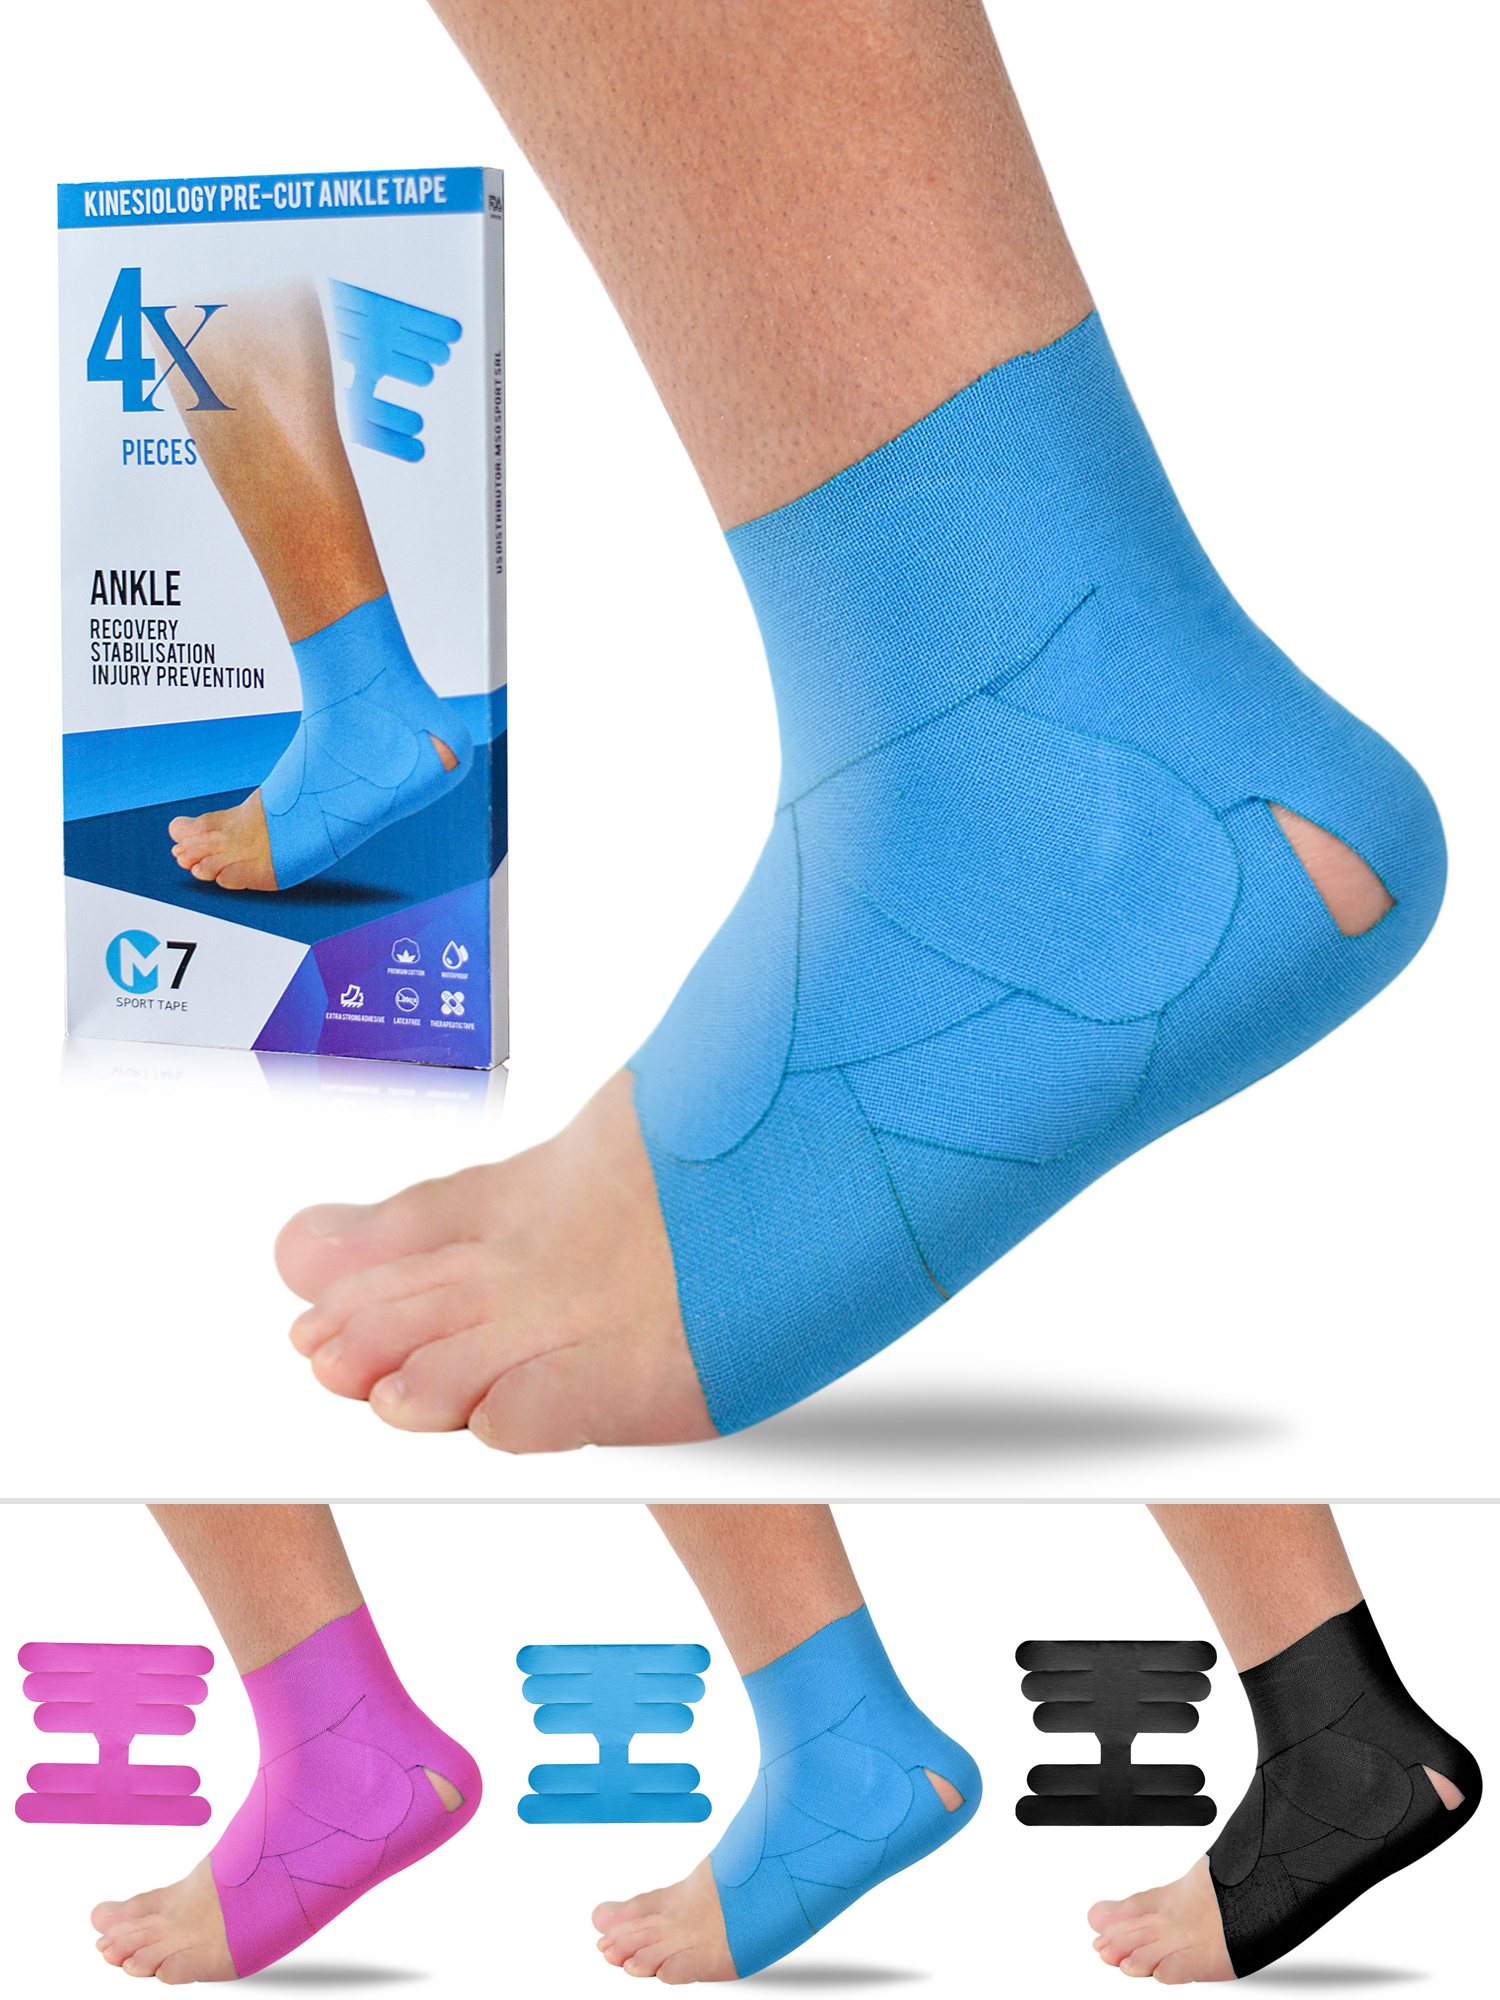 therapeutic ankle tape for ankle injury